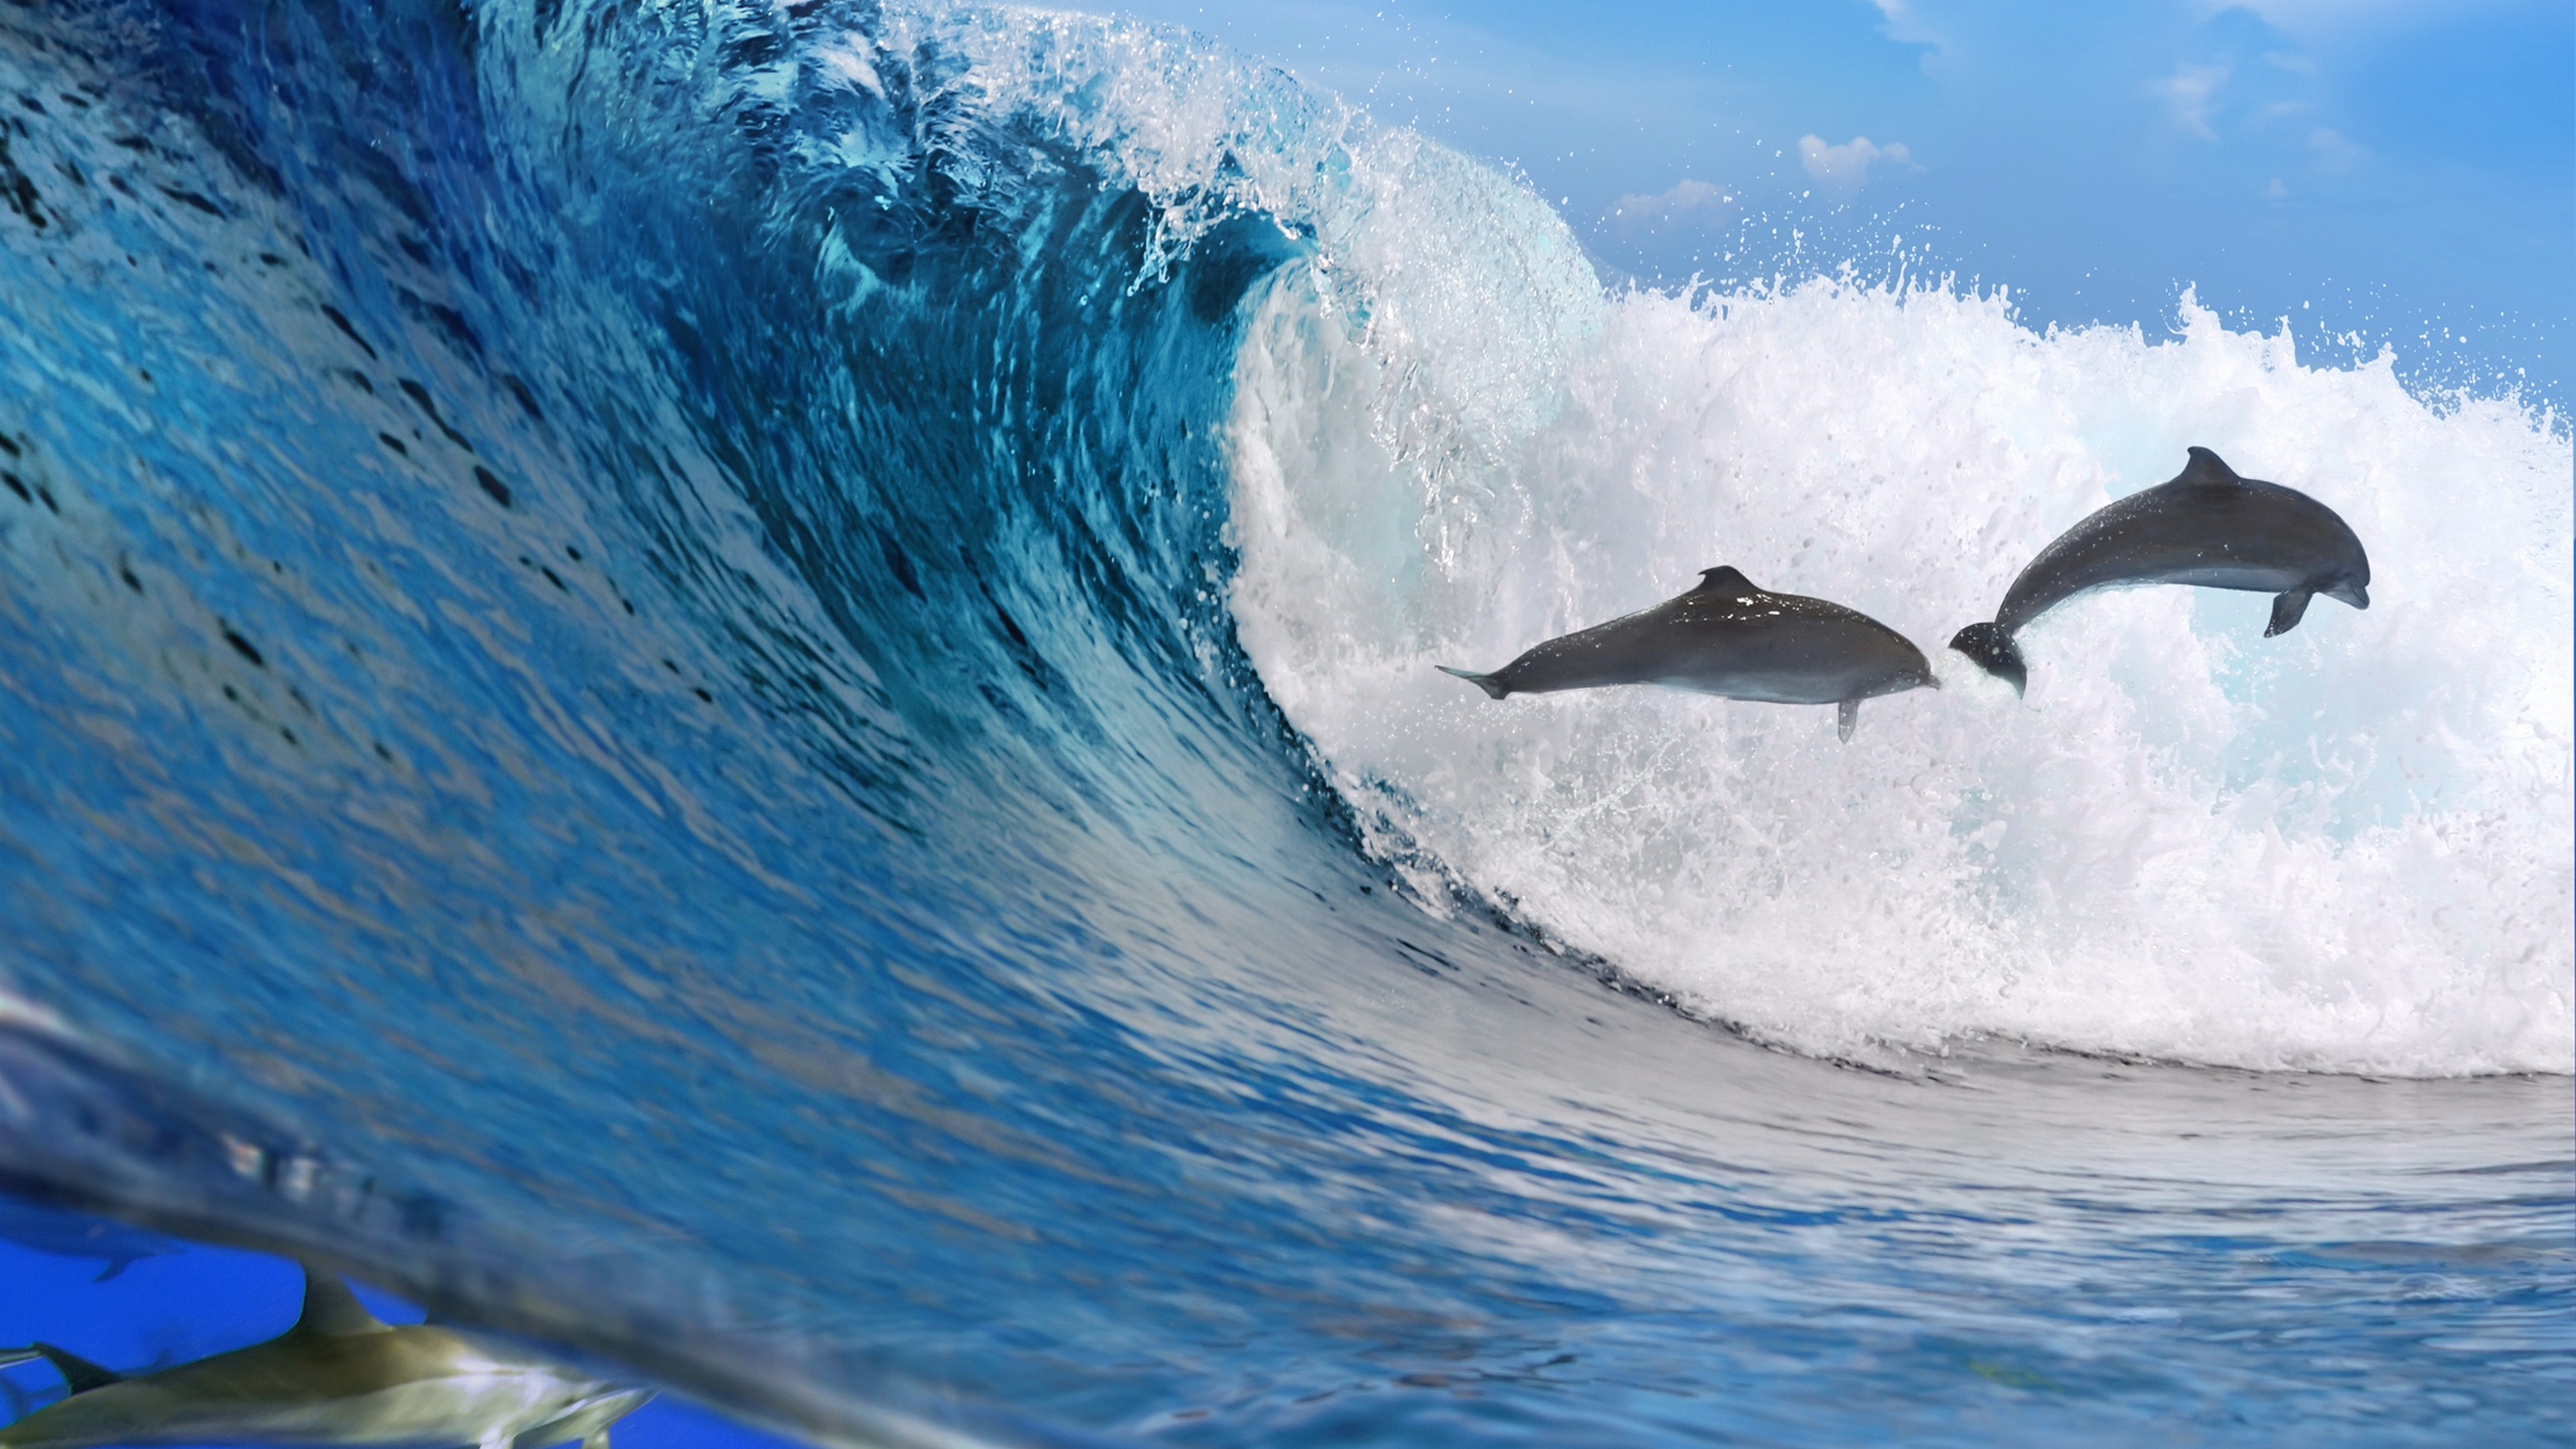 Pictures Of Dolphins Under Water Wallpapers